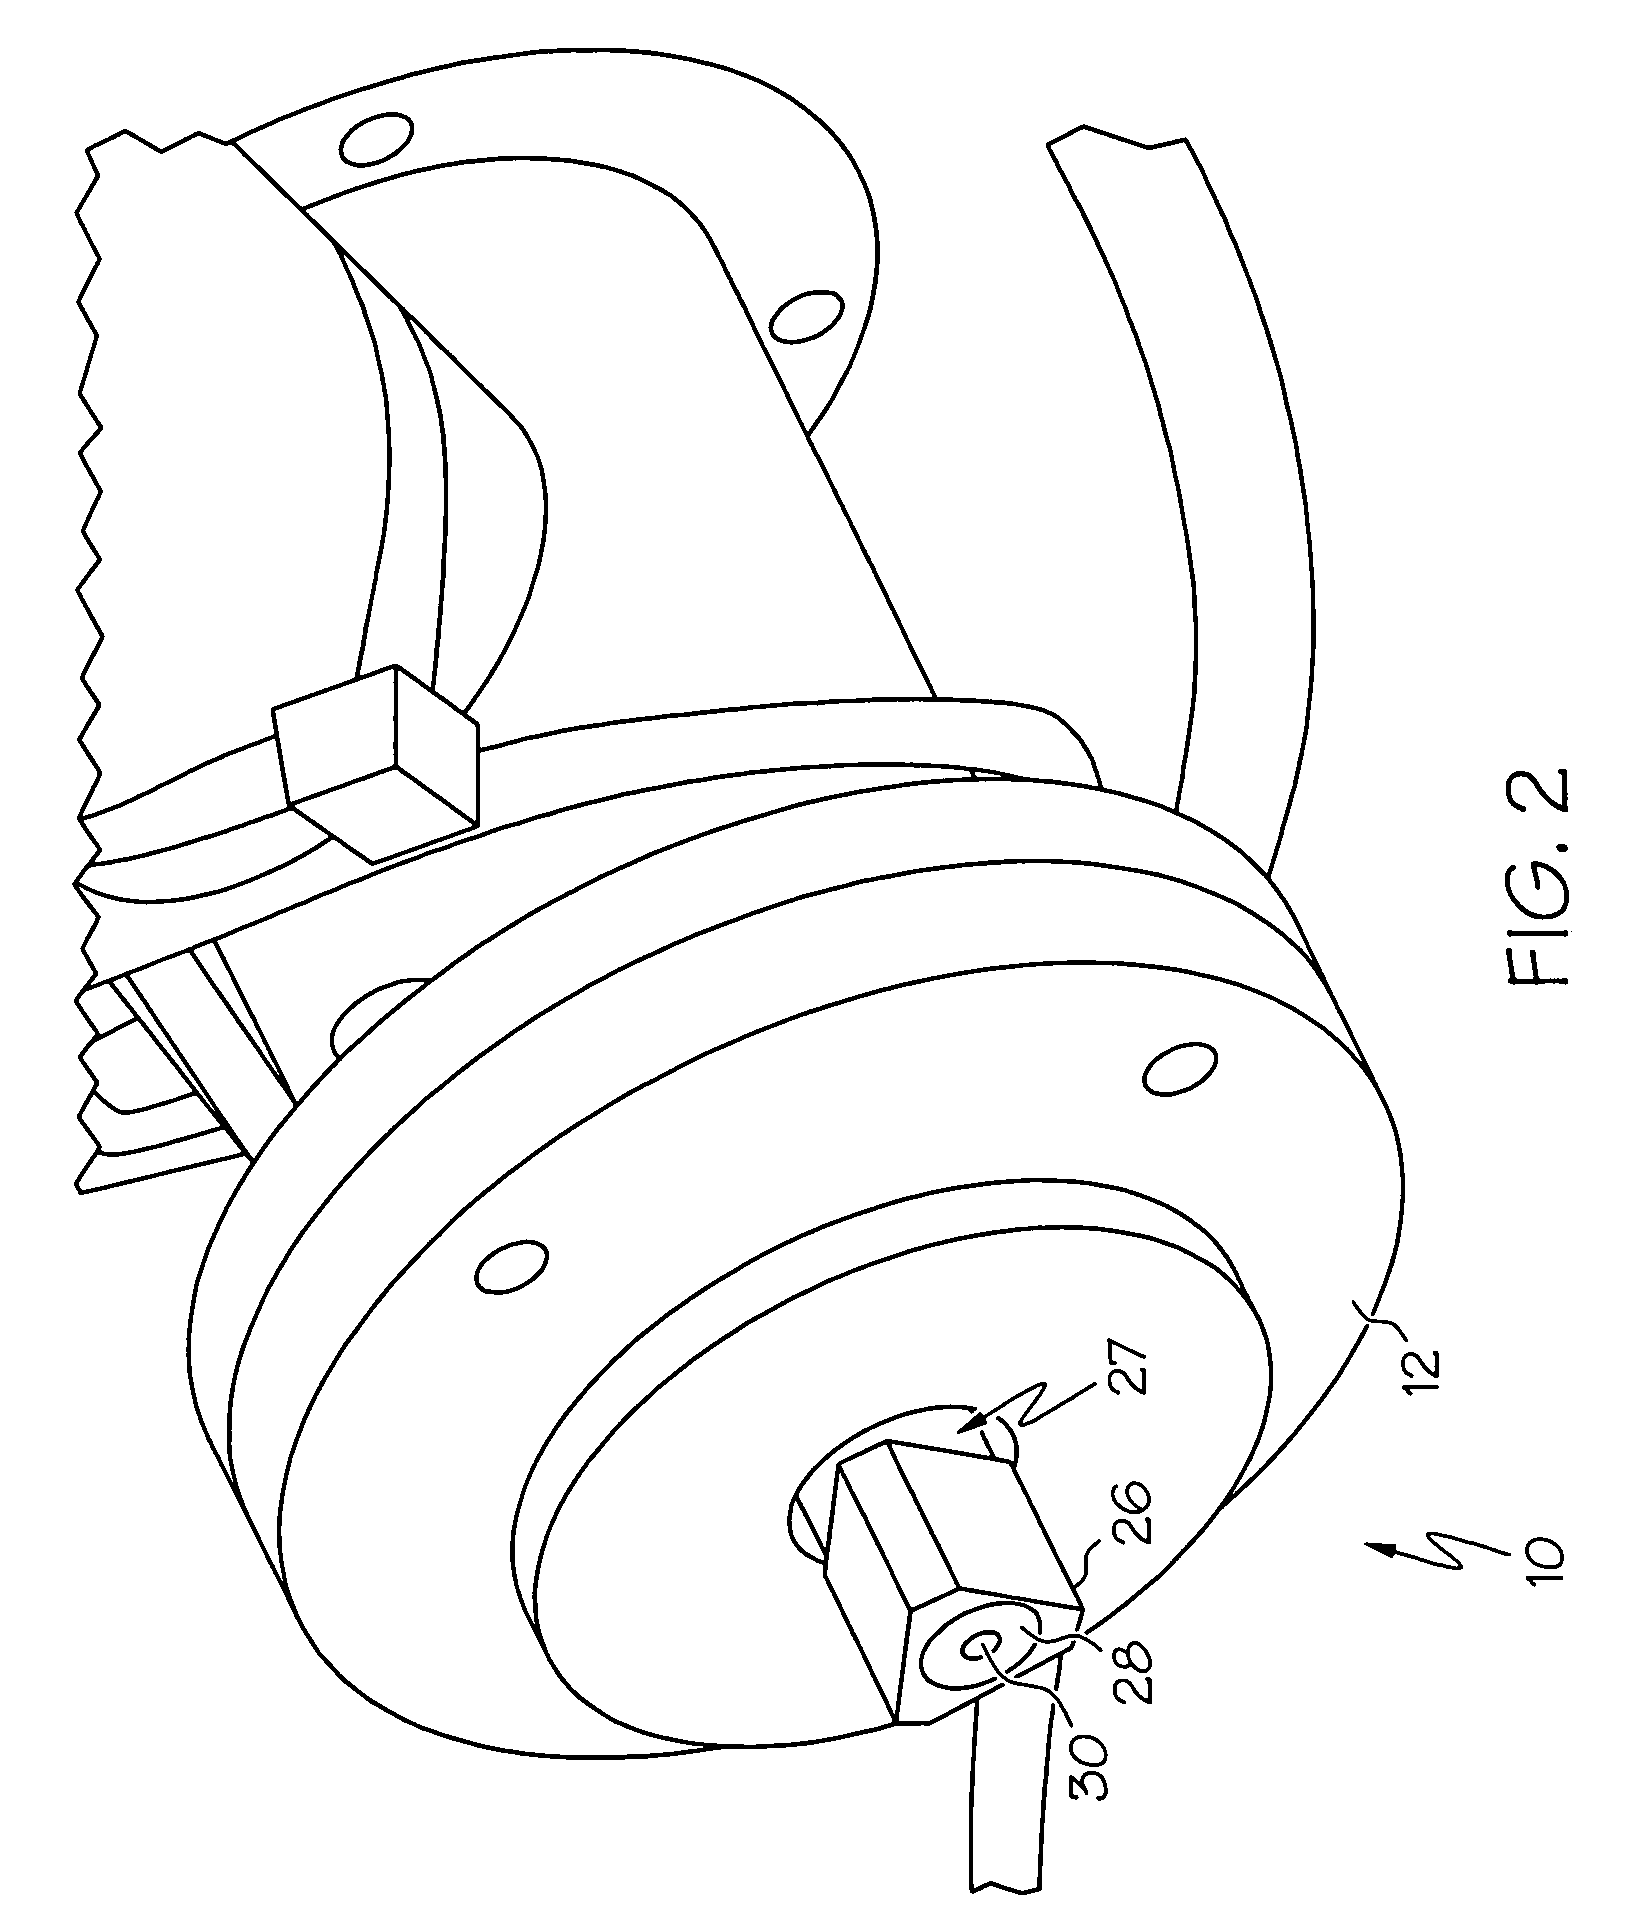 Apparatuses for crimping and loading of intraluminal medical devices